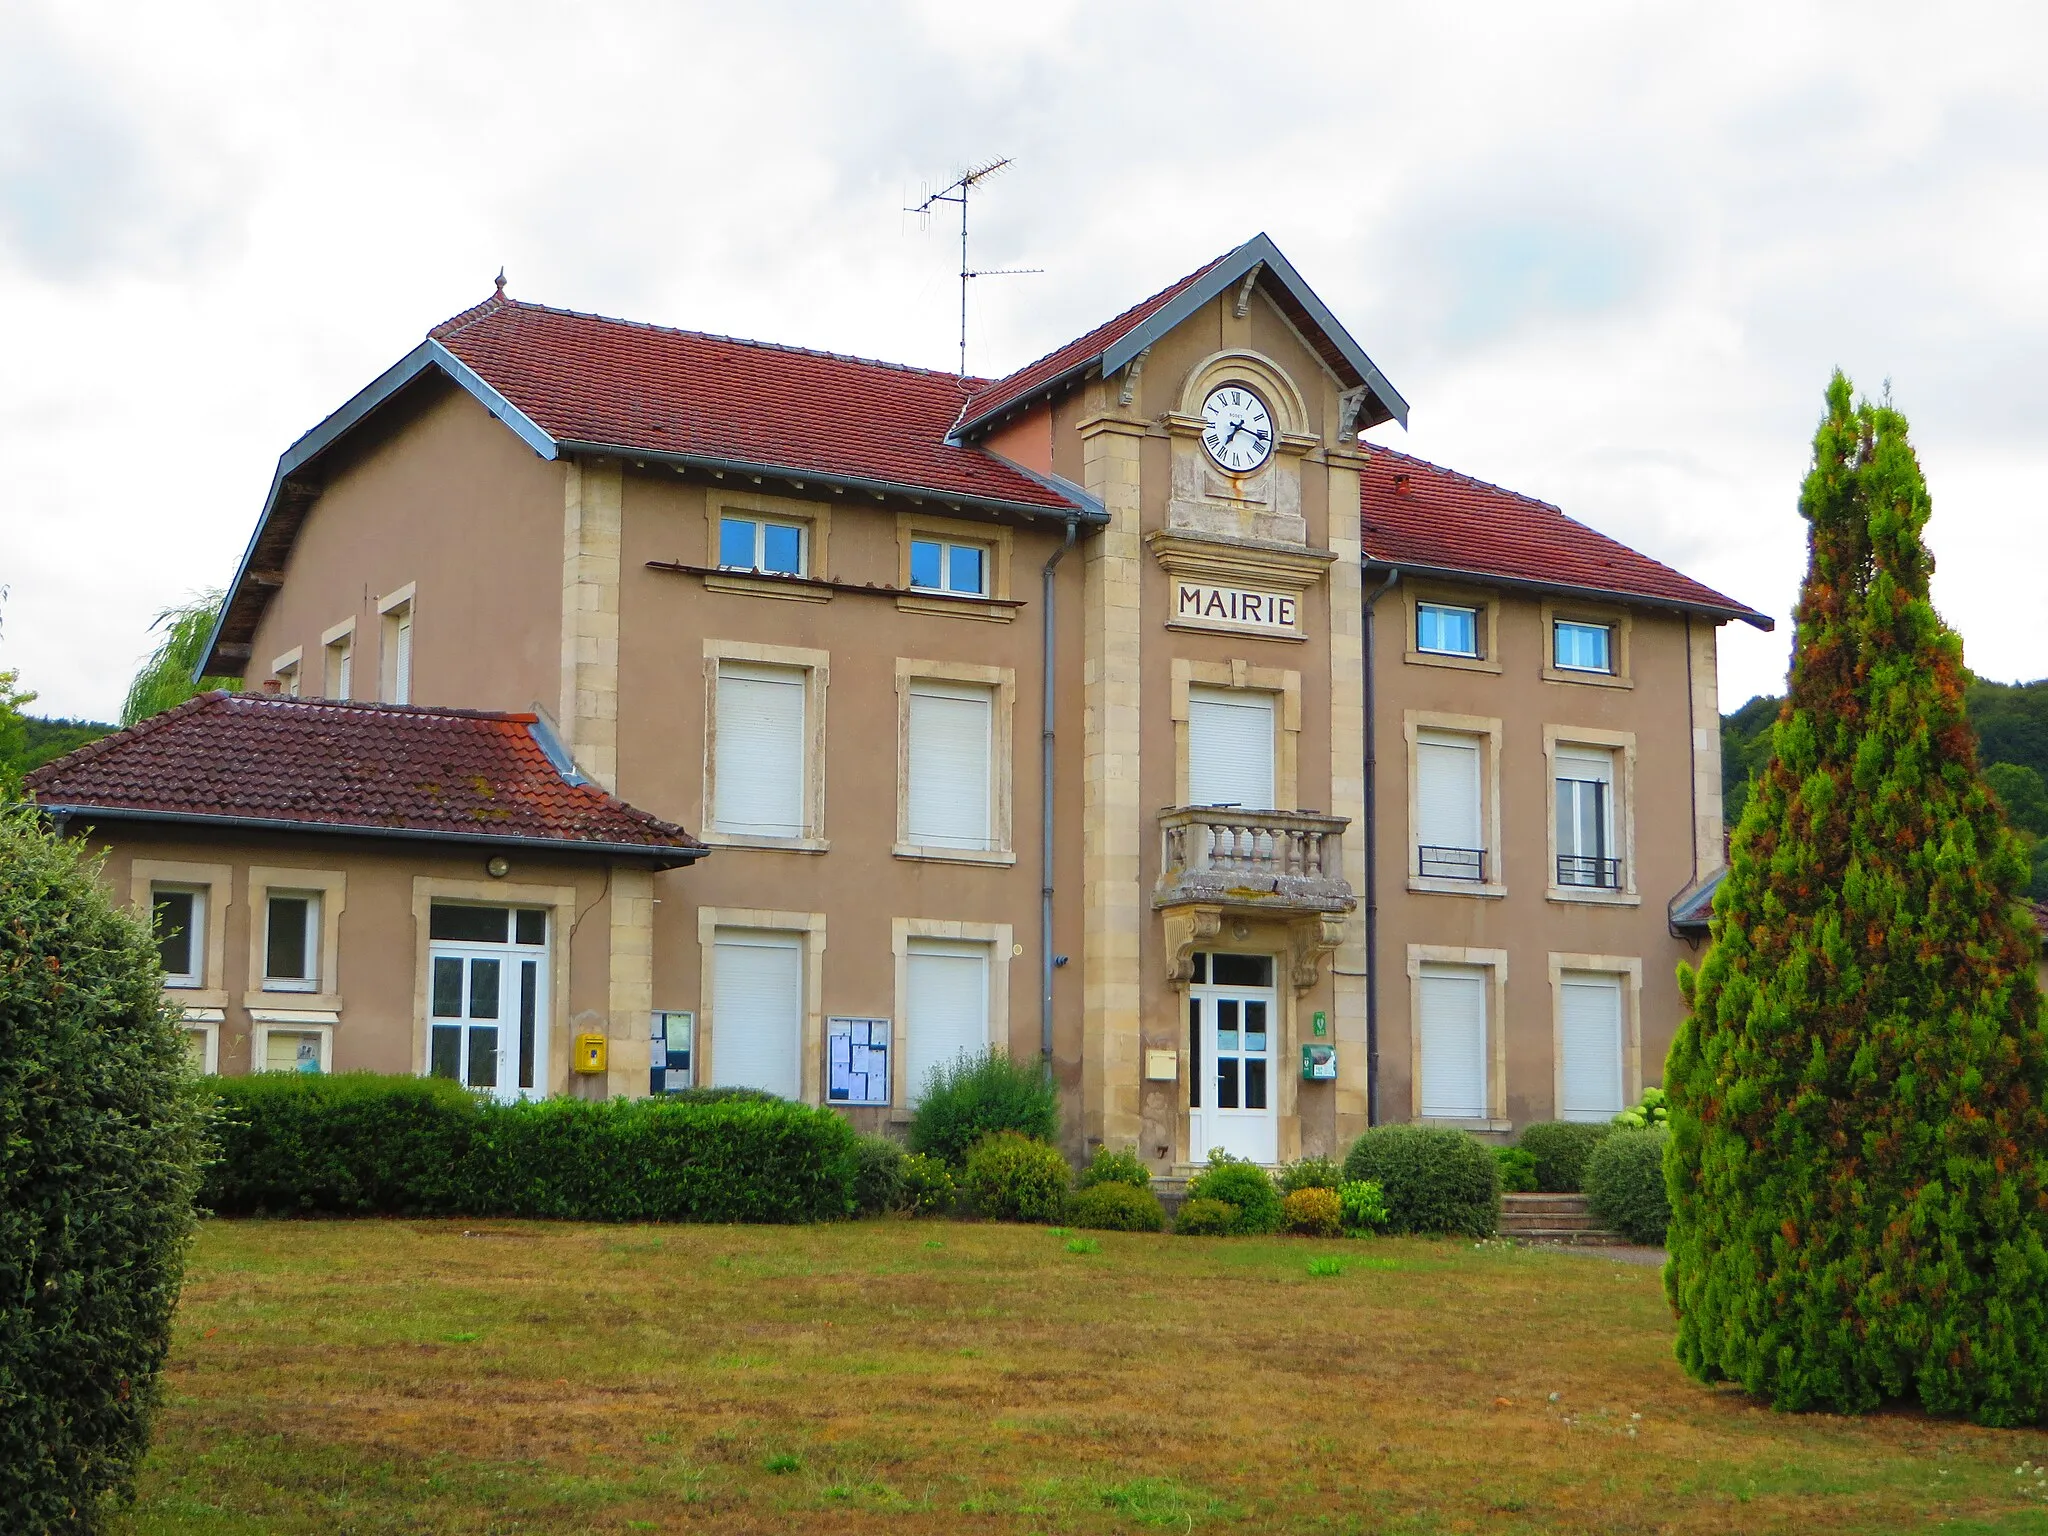 Photo showing: Herbeuville La mairie